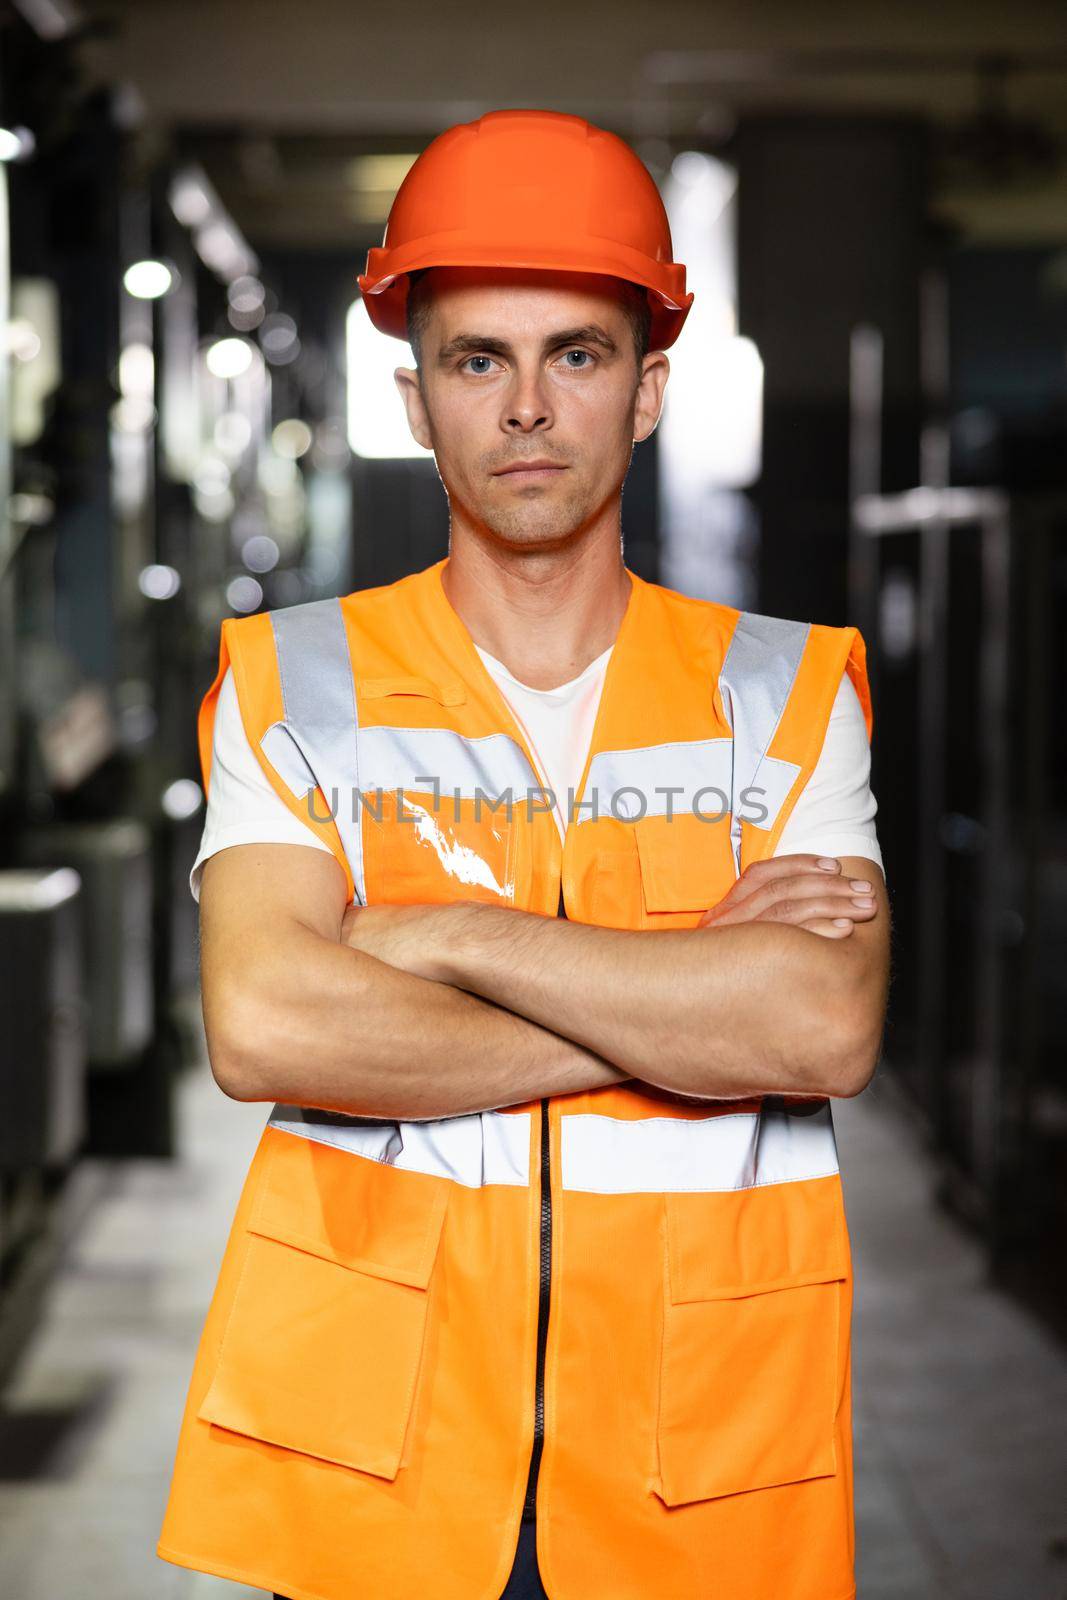 Power energy motor machinery cabinets in control or server room, operator station network in industry factory. Portrait of an engineer man or worker crossing arms, working in electrical room station.